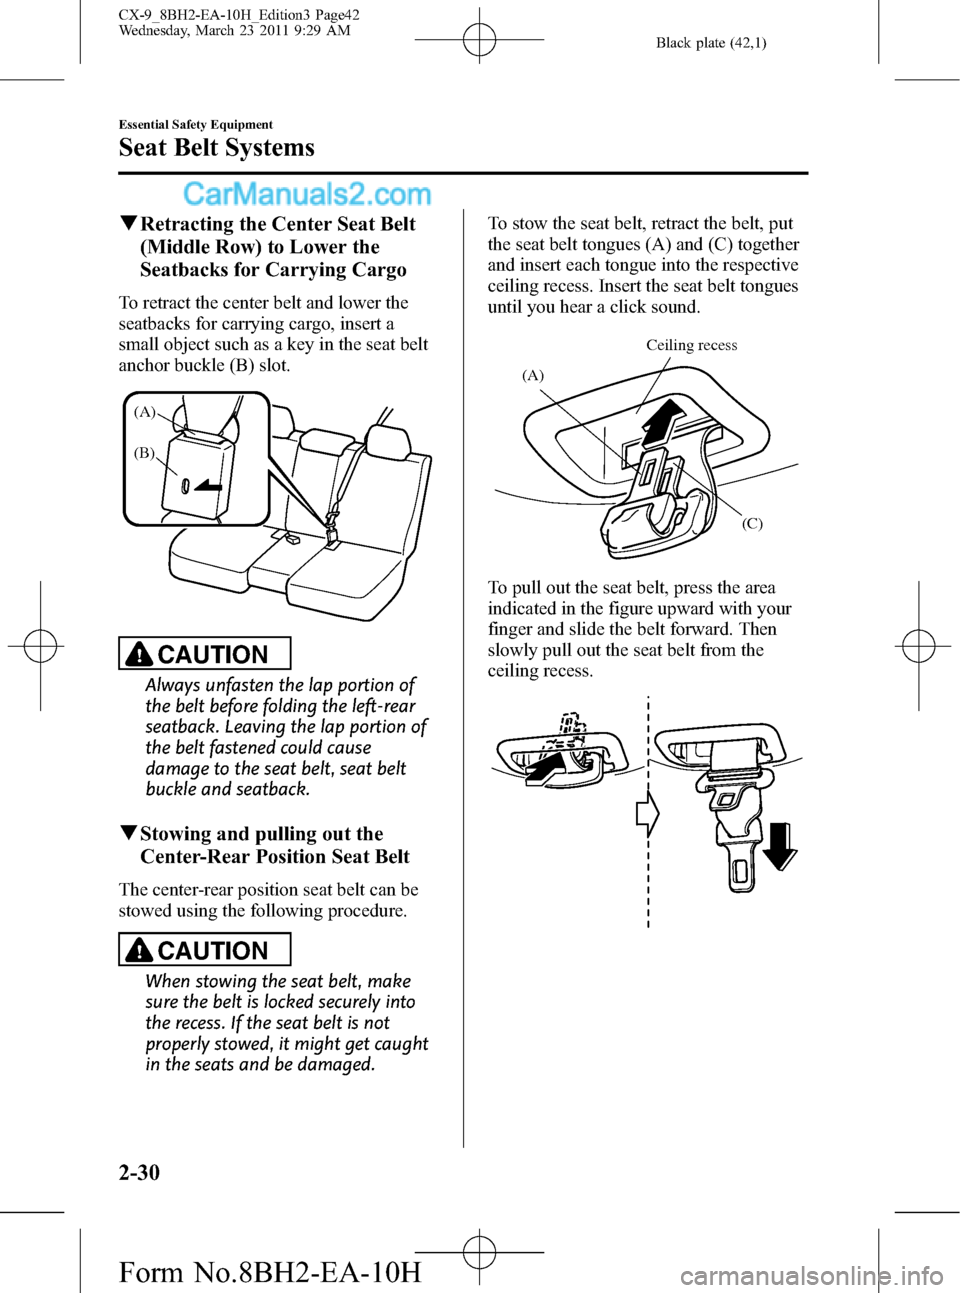 MAZDA MODEL CX-9 2011  Owners Manual (in English) Black plate (42,1)
qRetracting the Center Seat Belt
(Middle Row) to Lower the
Seatbacks for Carrying Cargo
To retract the center belt and lower the
seatbacks for carrying cargo, insert a
small object 